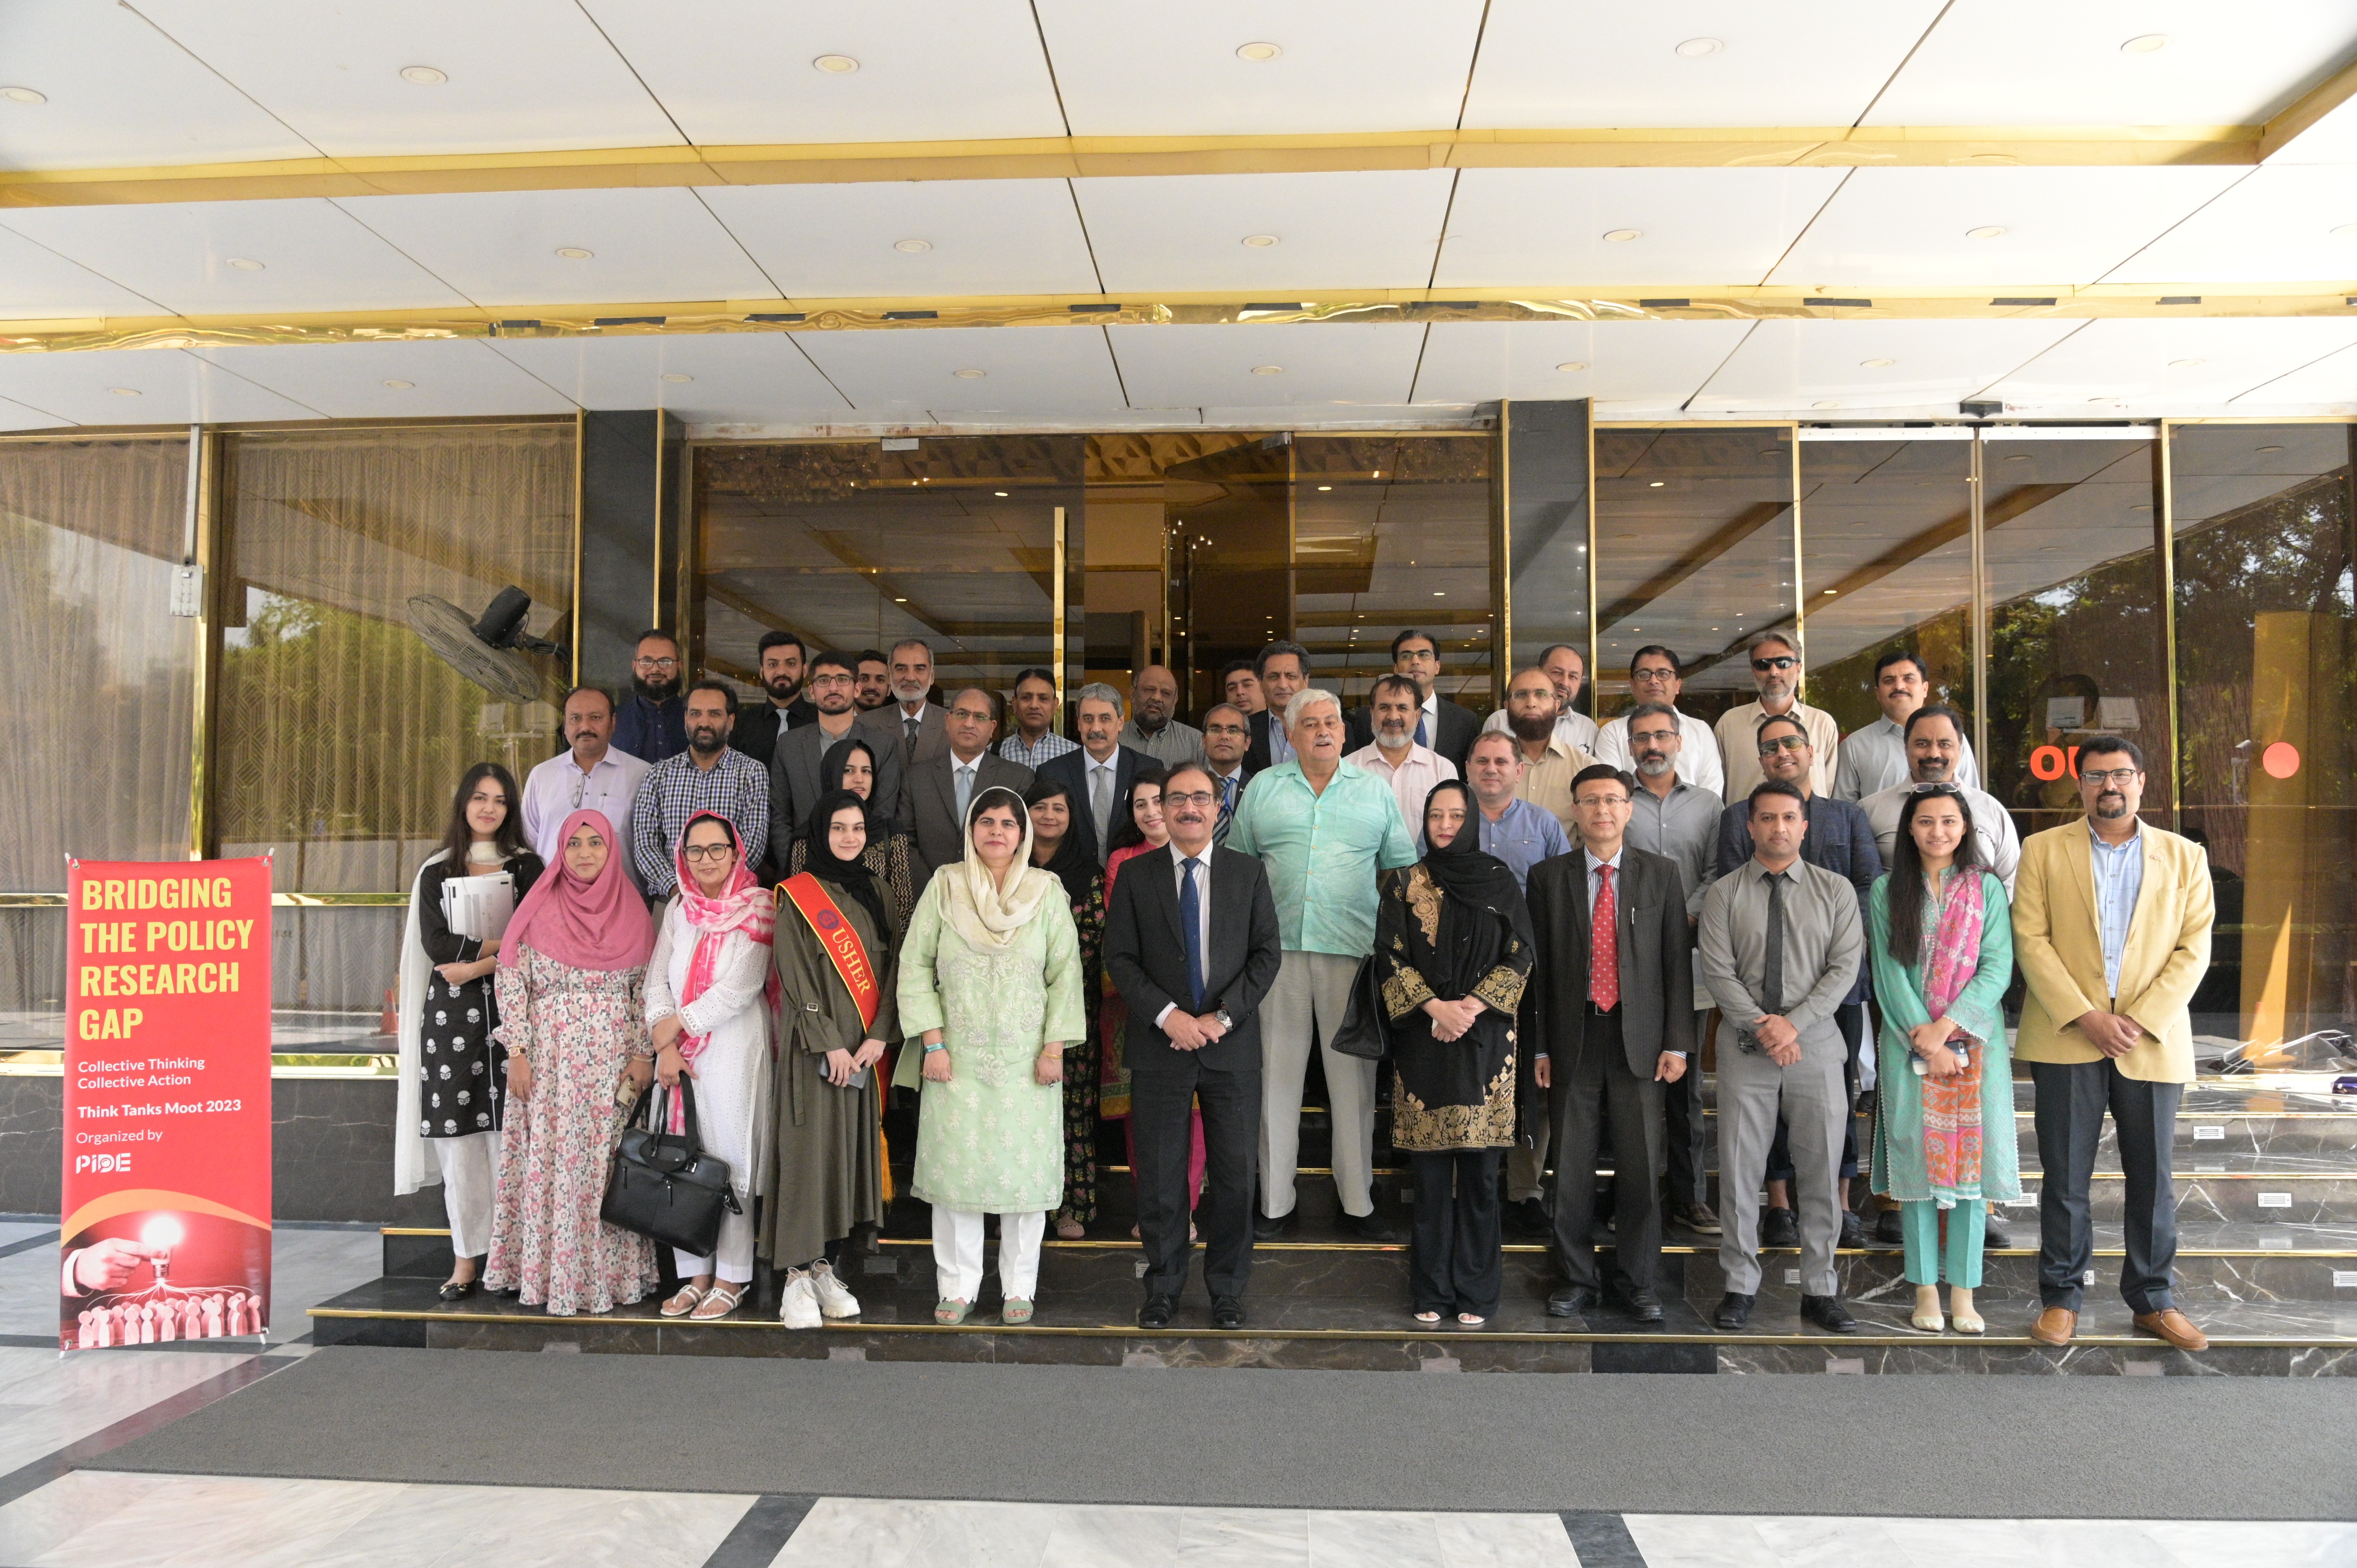 A group photo of all the participants of reform synergy with the event organizers and vice chancellor of PIDE Nadeem ul Haque